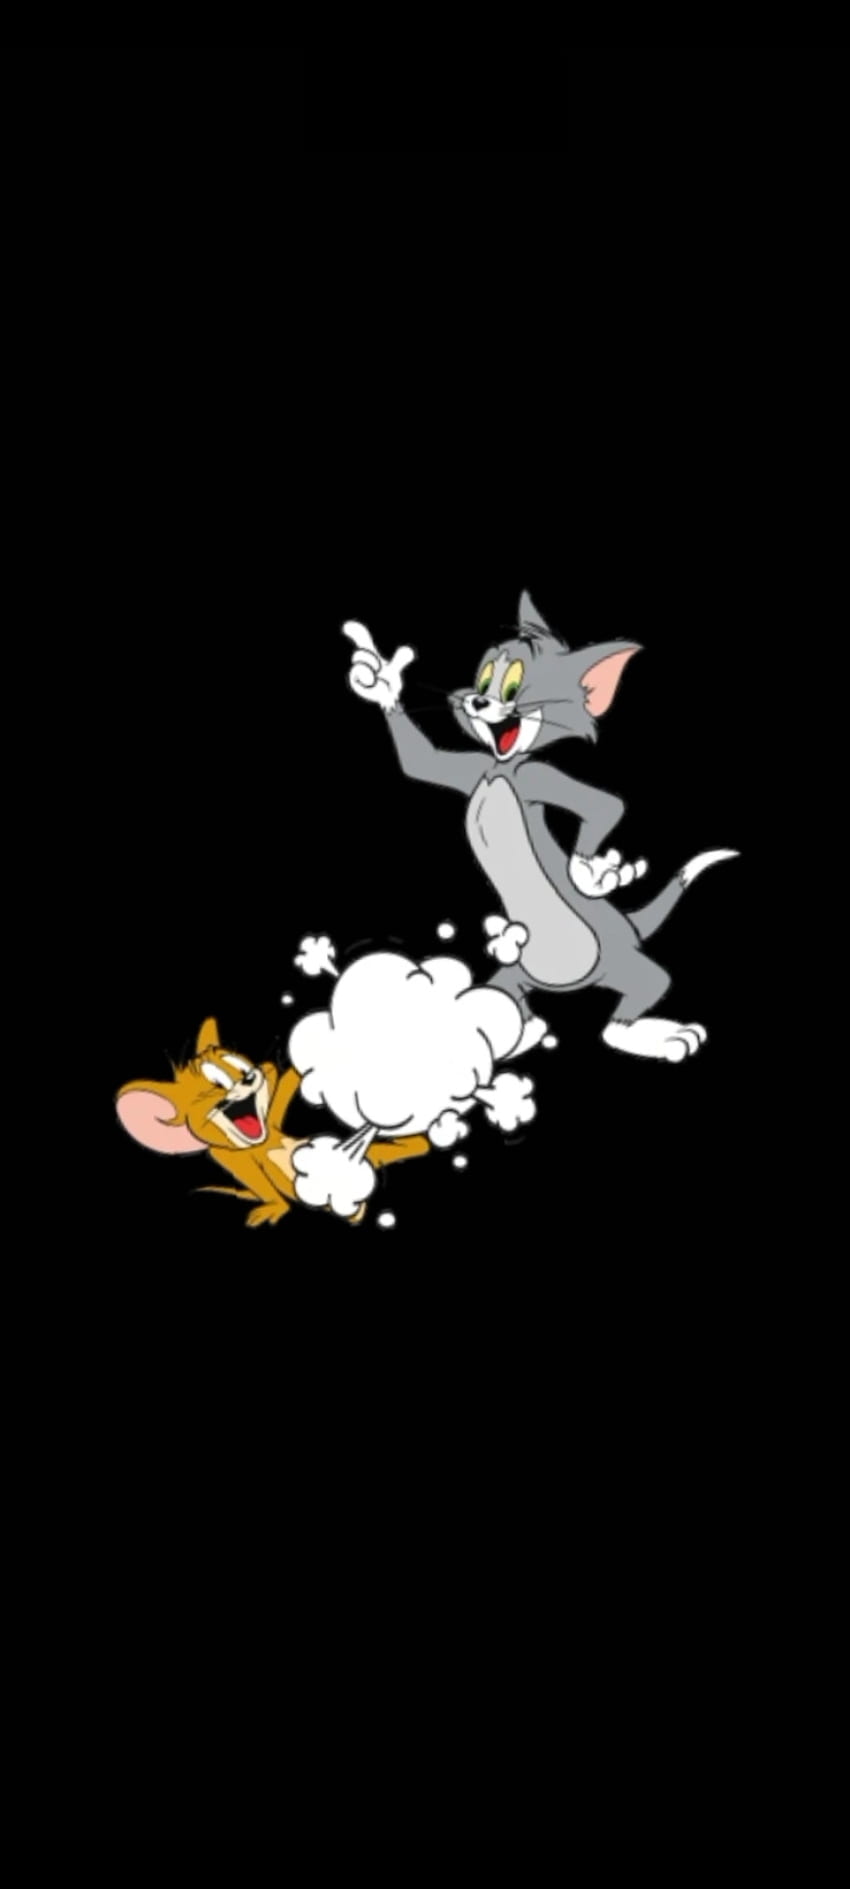 Tom and Jerry, symbol, art, nostalgic, cartoon network, hilarious, cat and mouse, tom and jery, funny HD phone wallpaper